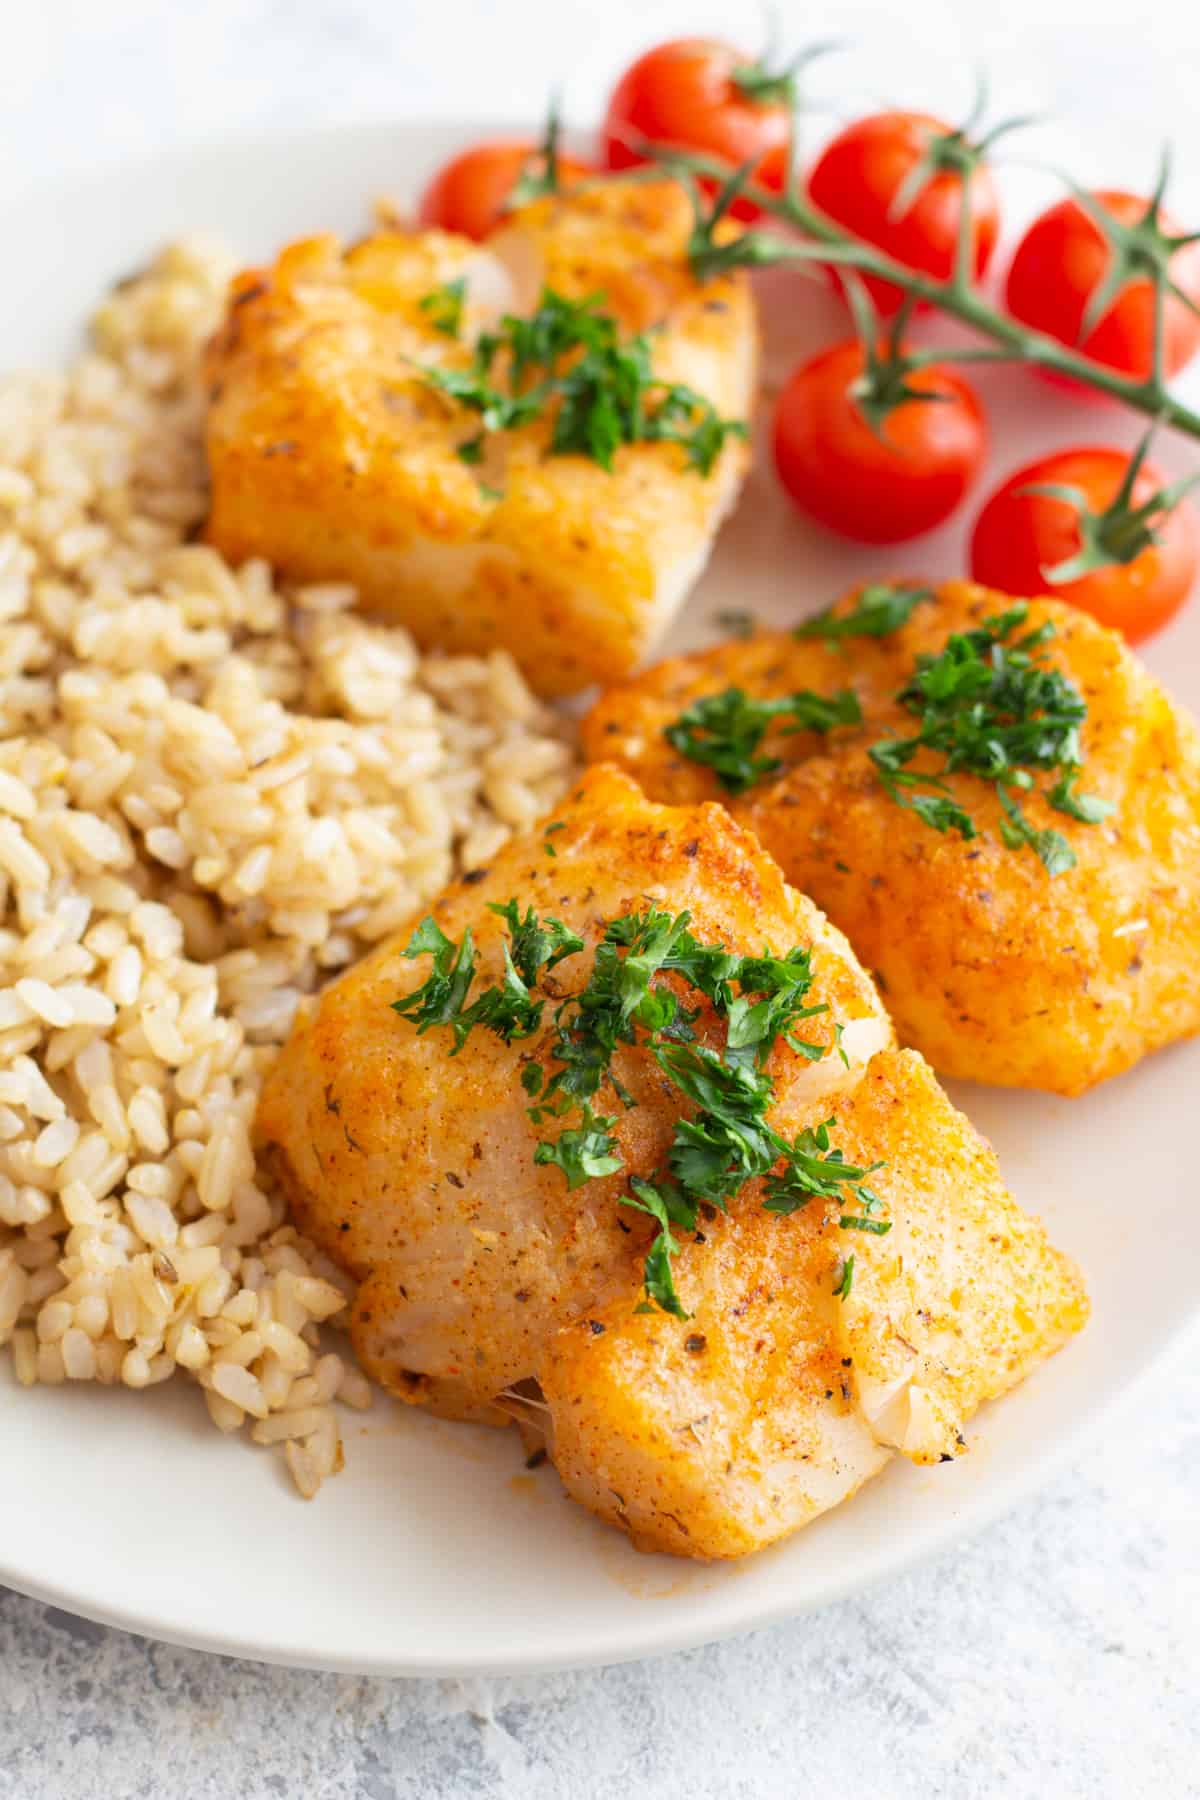 Parmesan crusted baked cod recipe is easy and ready in 30 minutes. Tender cod fillets are coated with parmesan and baked to perfection. You can serve this dish with appetizing side dishes such as brown rice or a simple salad. 
